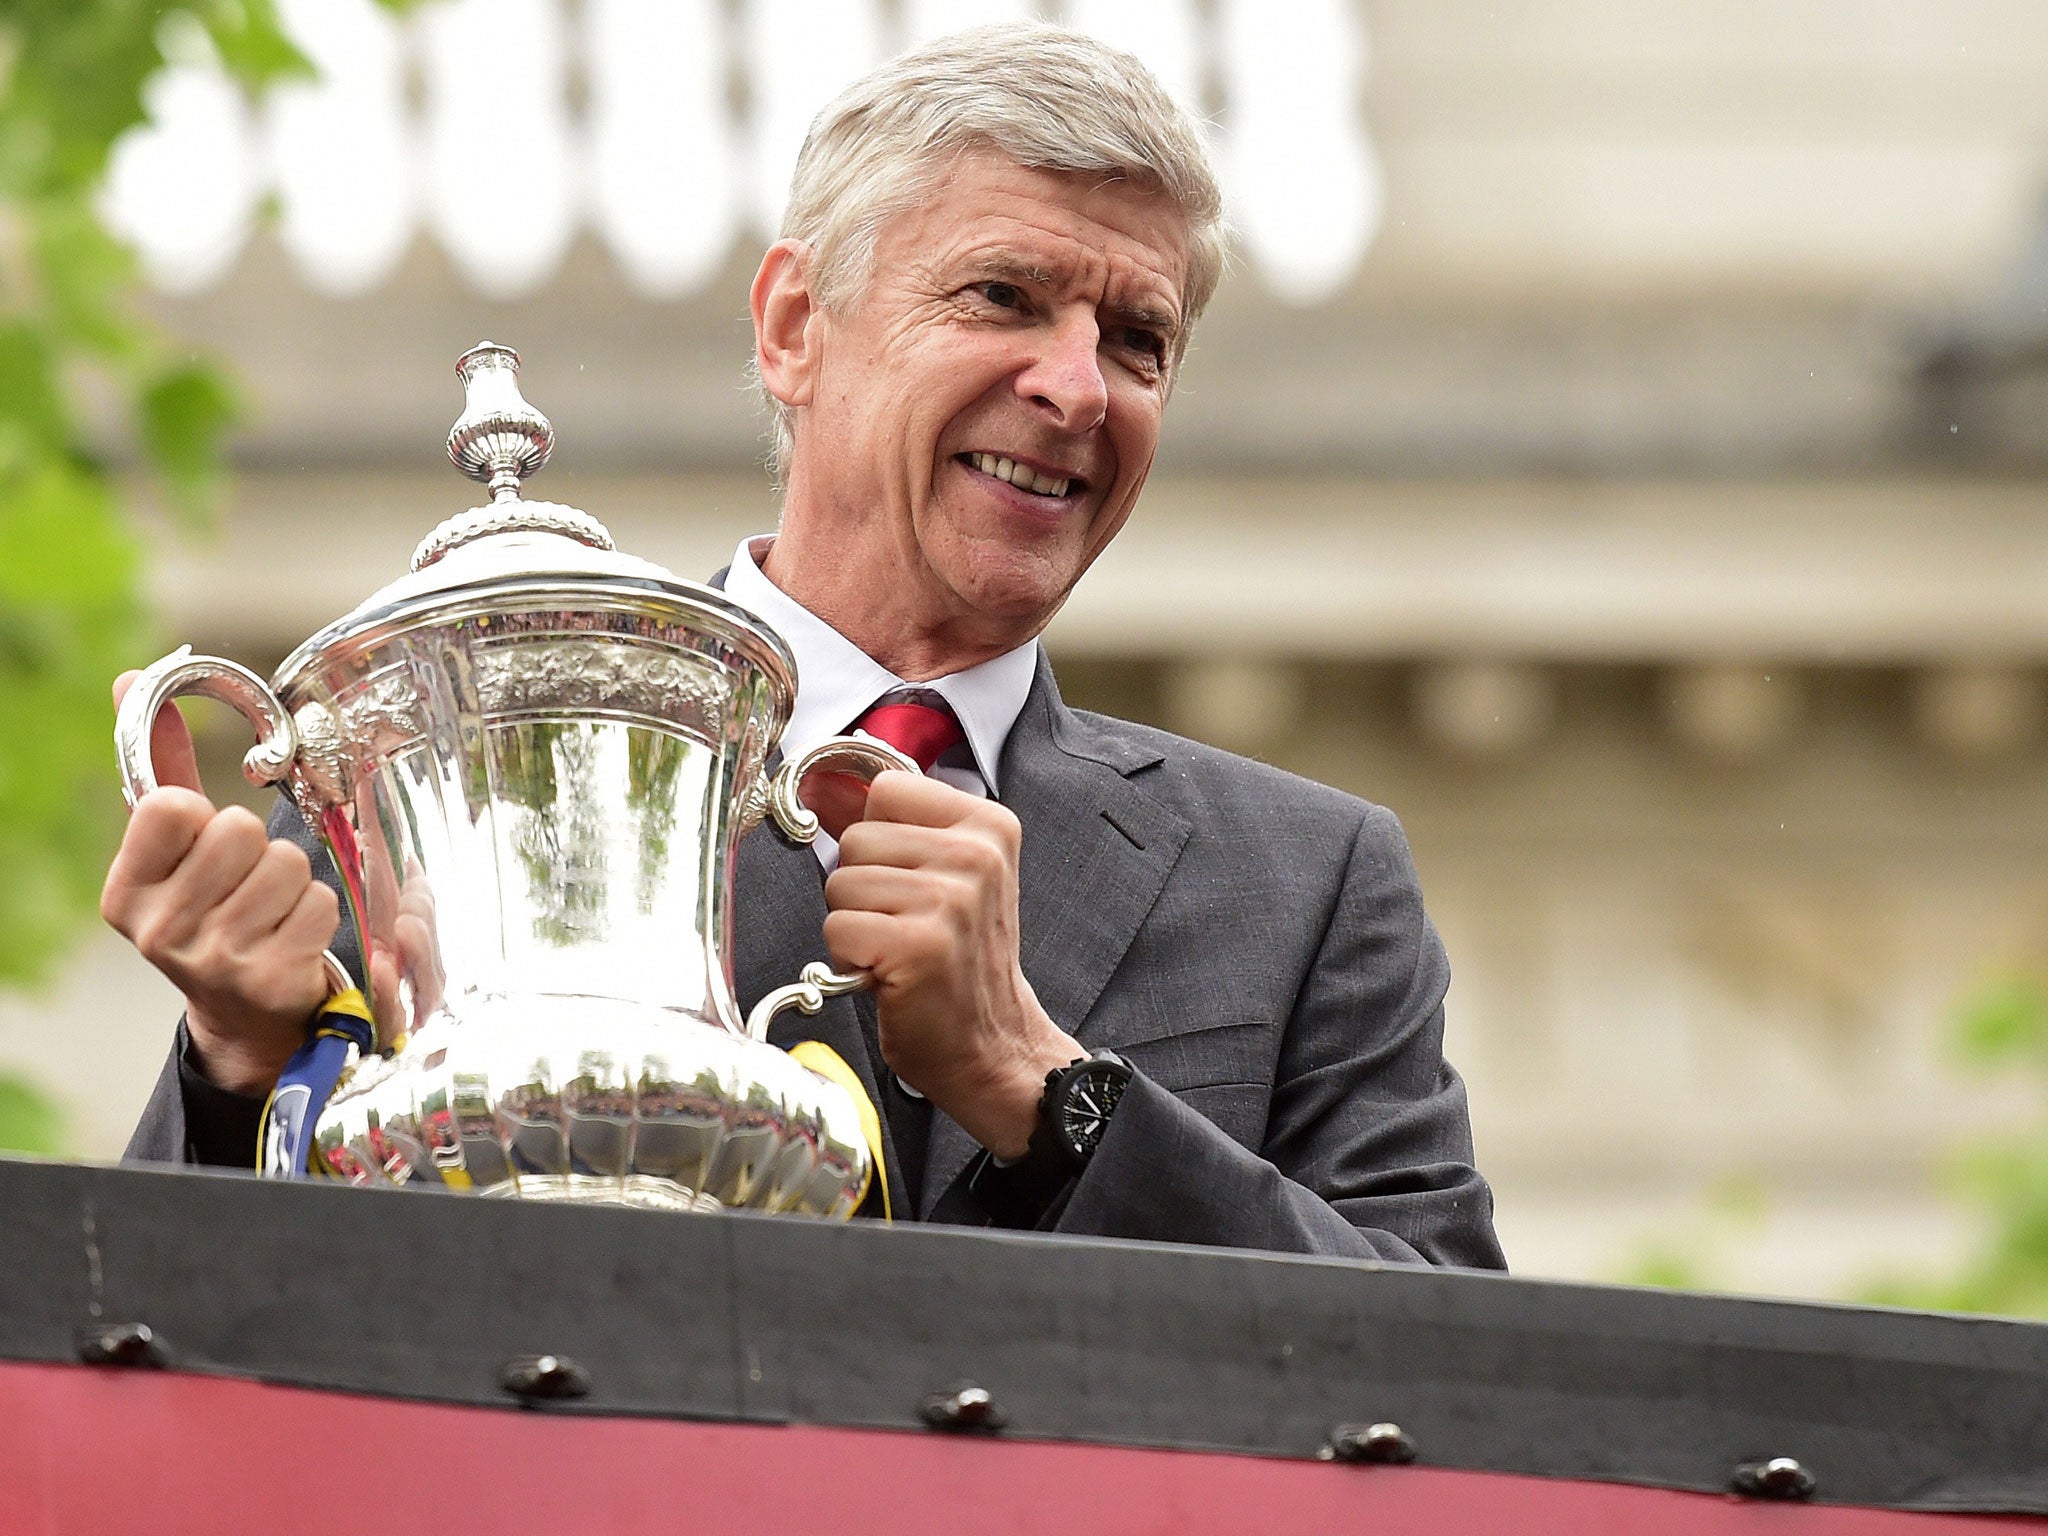 Arsenal Arsene Wenger holds the FA Cup trophy, which his team are the holders of